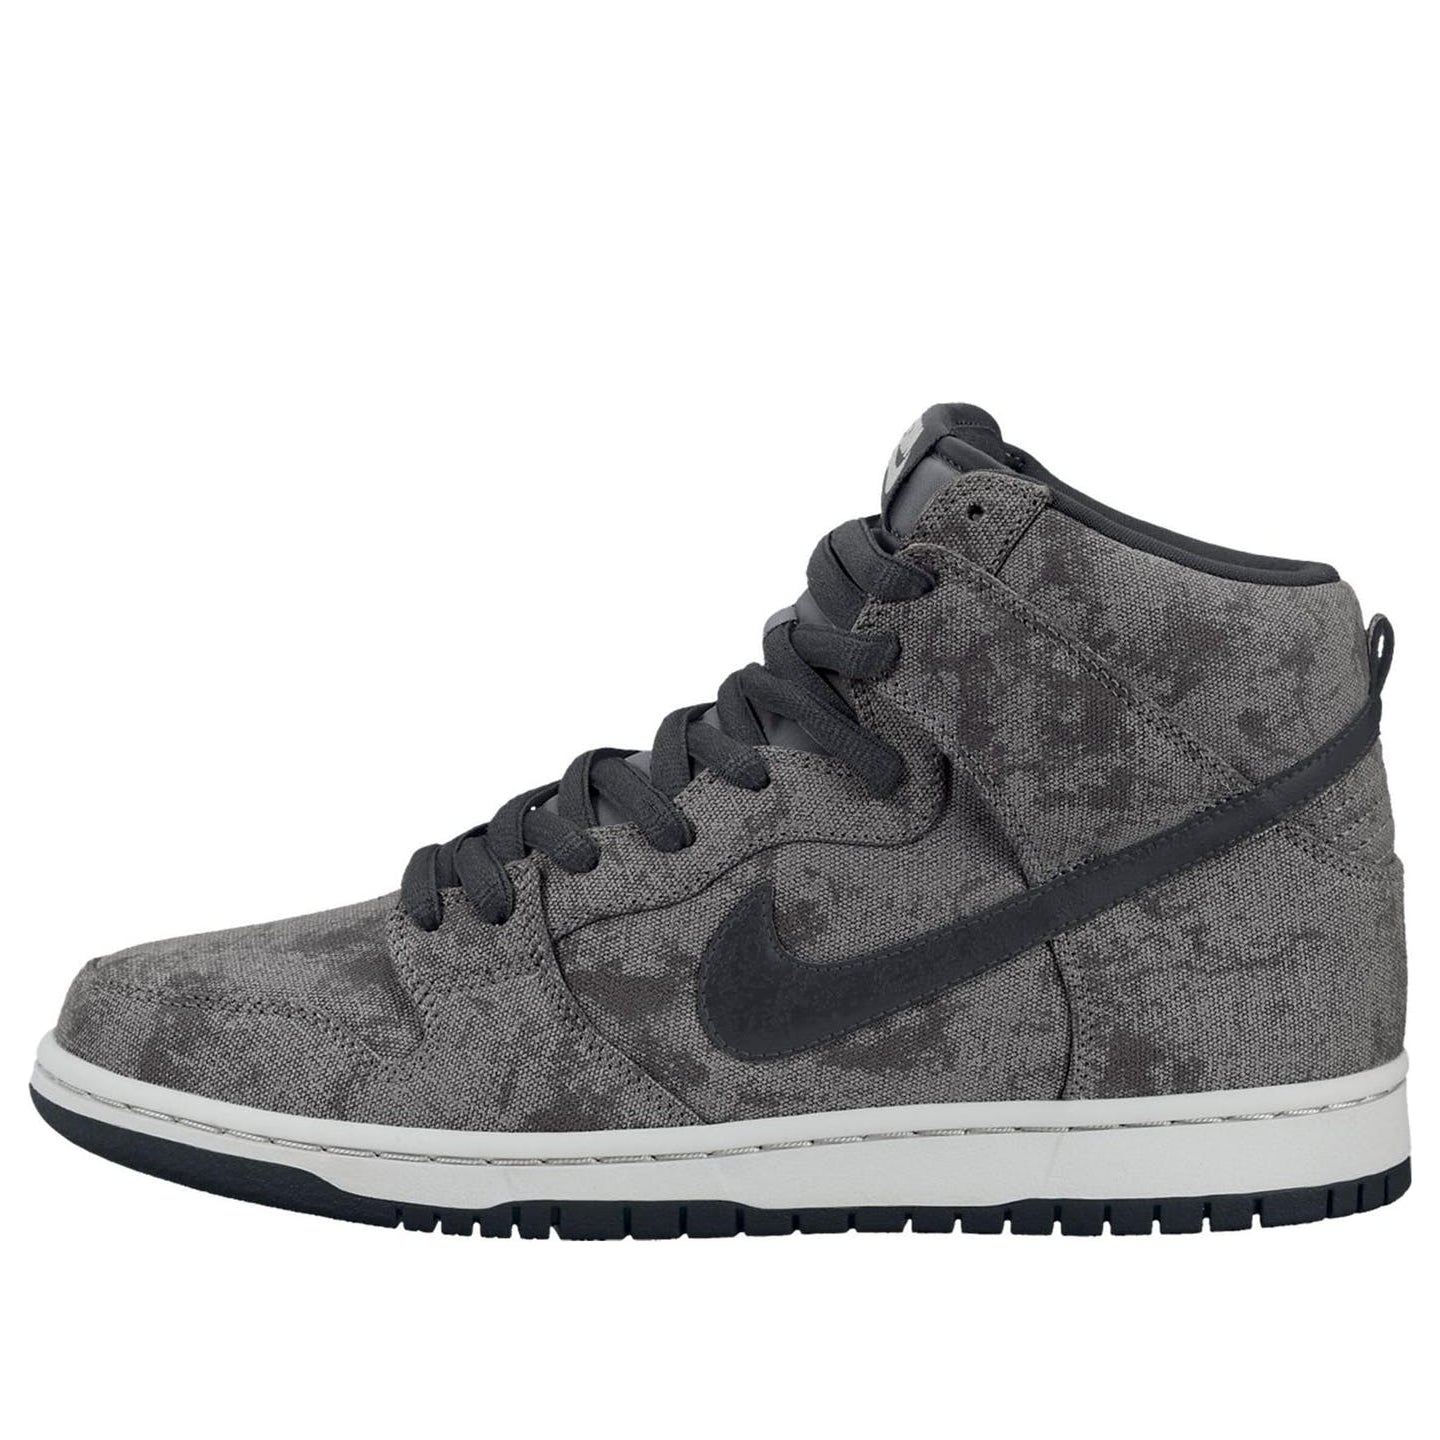 Nike Dunk High Pro Sb neutral grey/anthracite 305050-011 sneakmarks